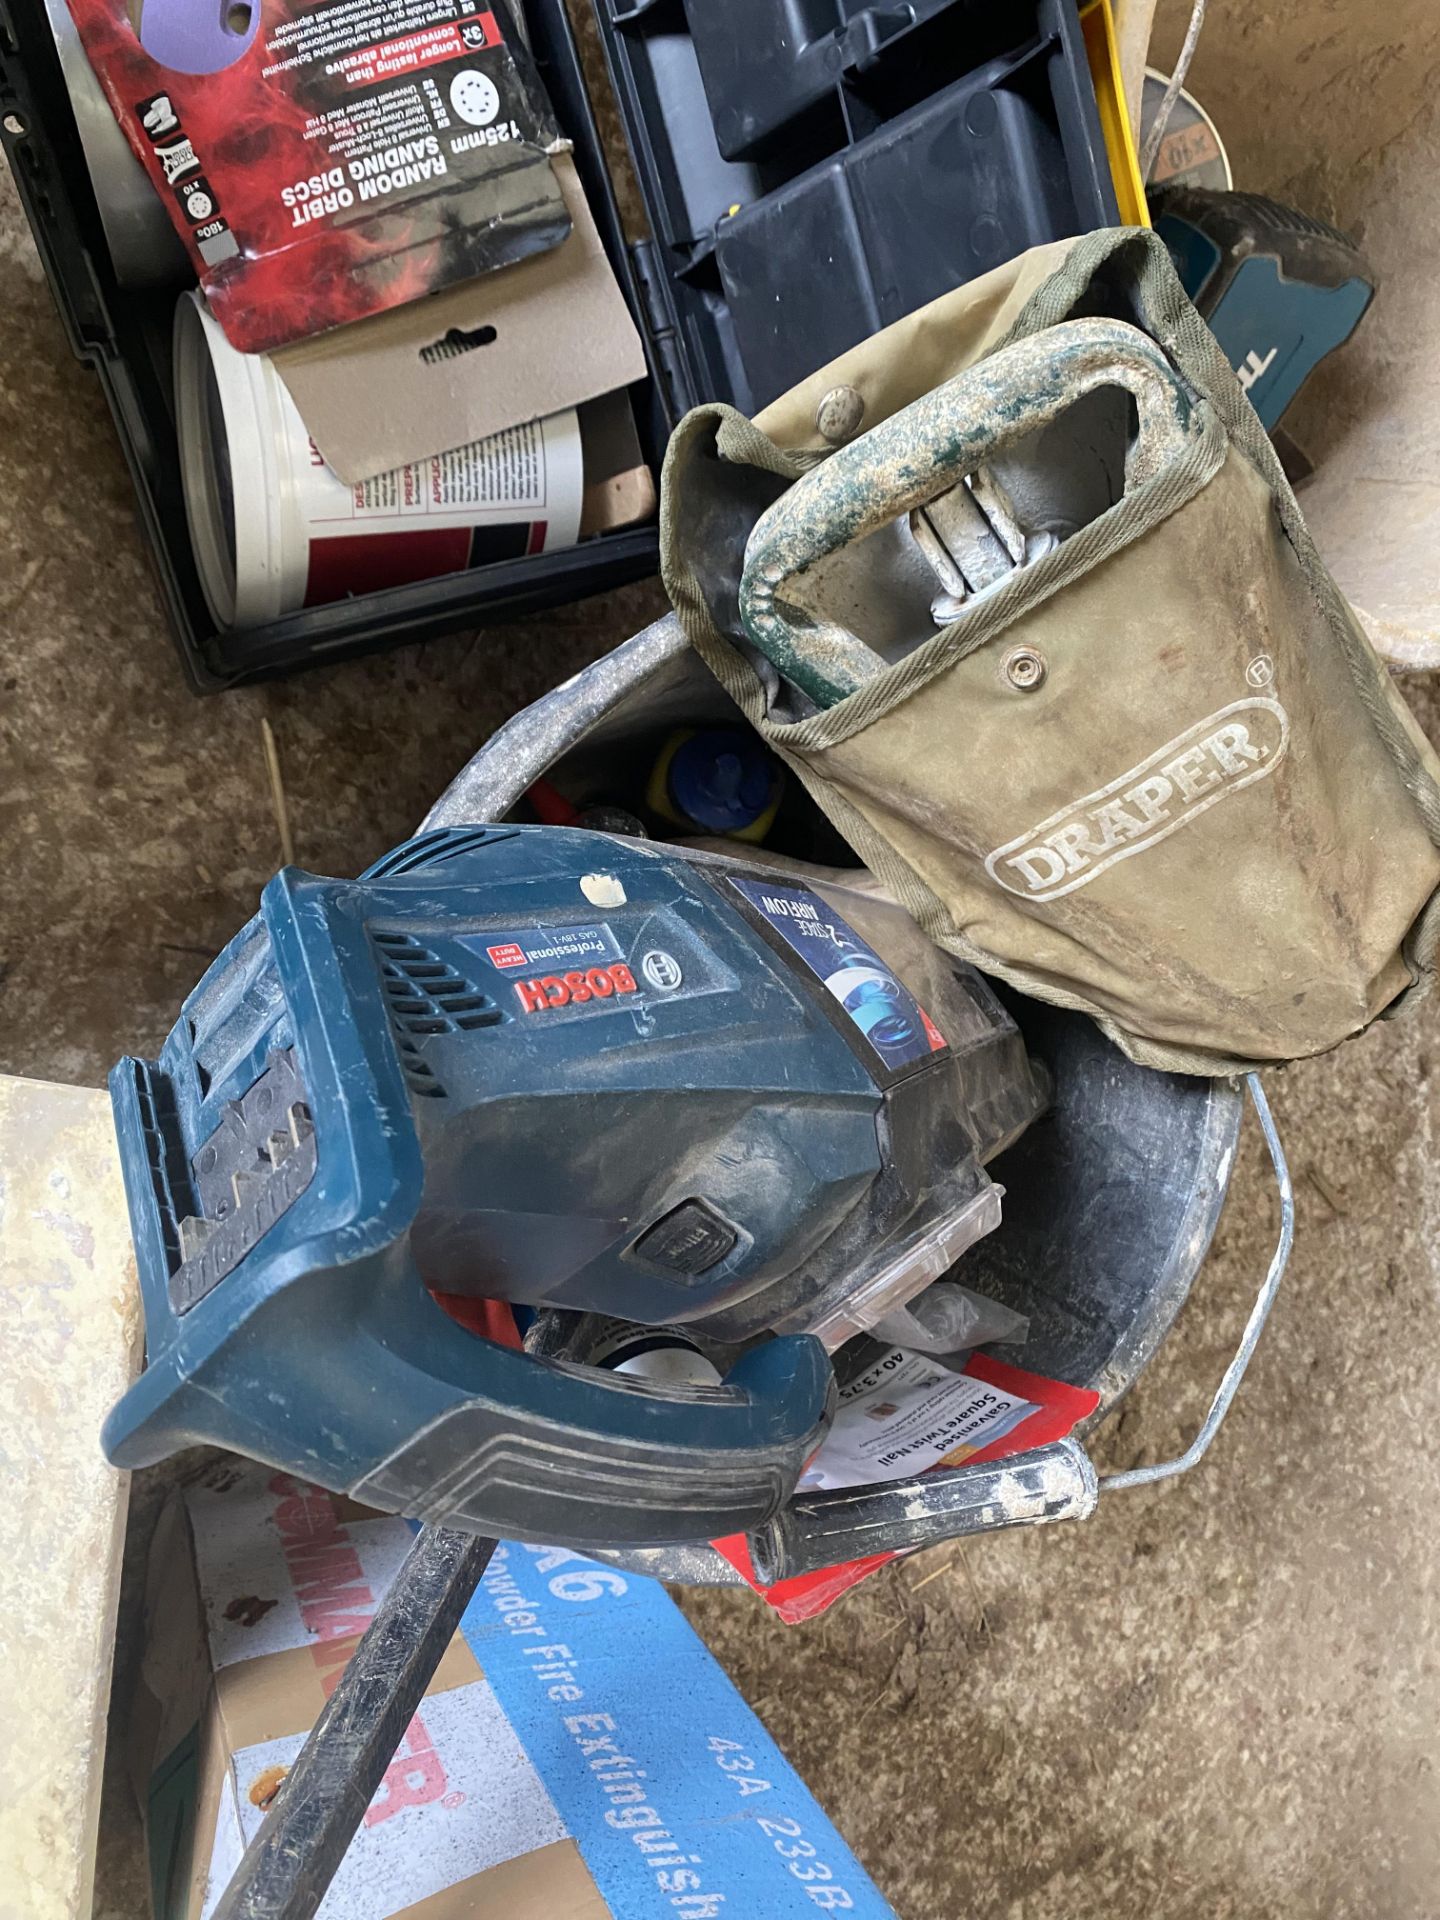 Miscellaneous lot including Numatic vacuum, fire extinguishers, various hand tools etc, as lotted - Bild 4 aus 7